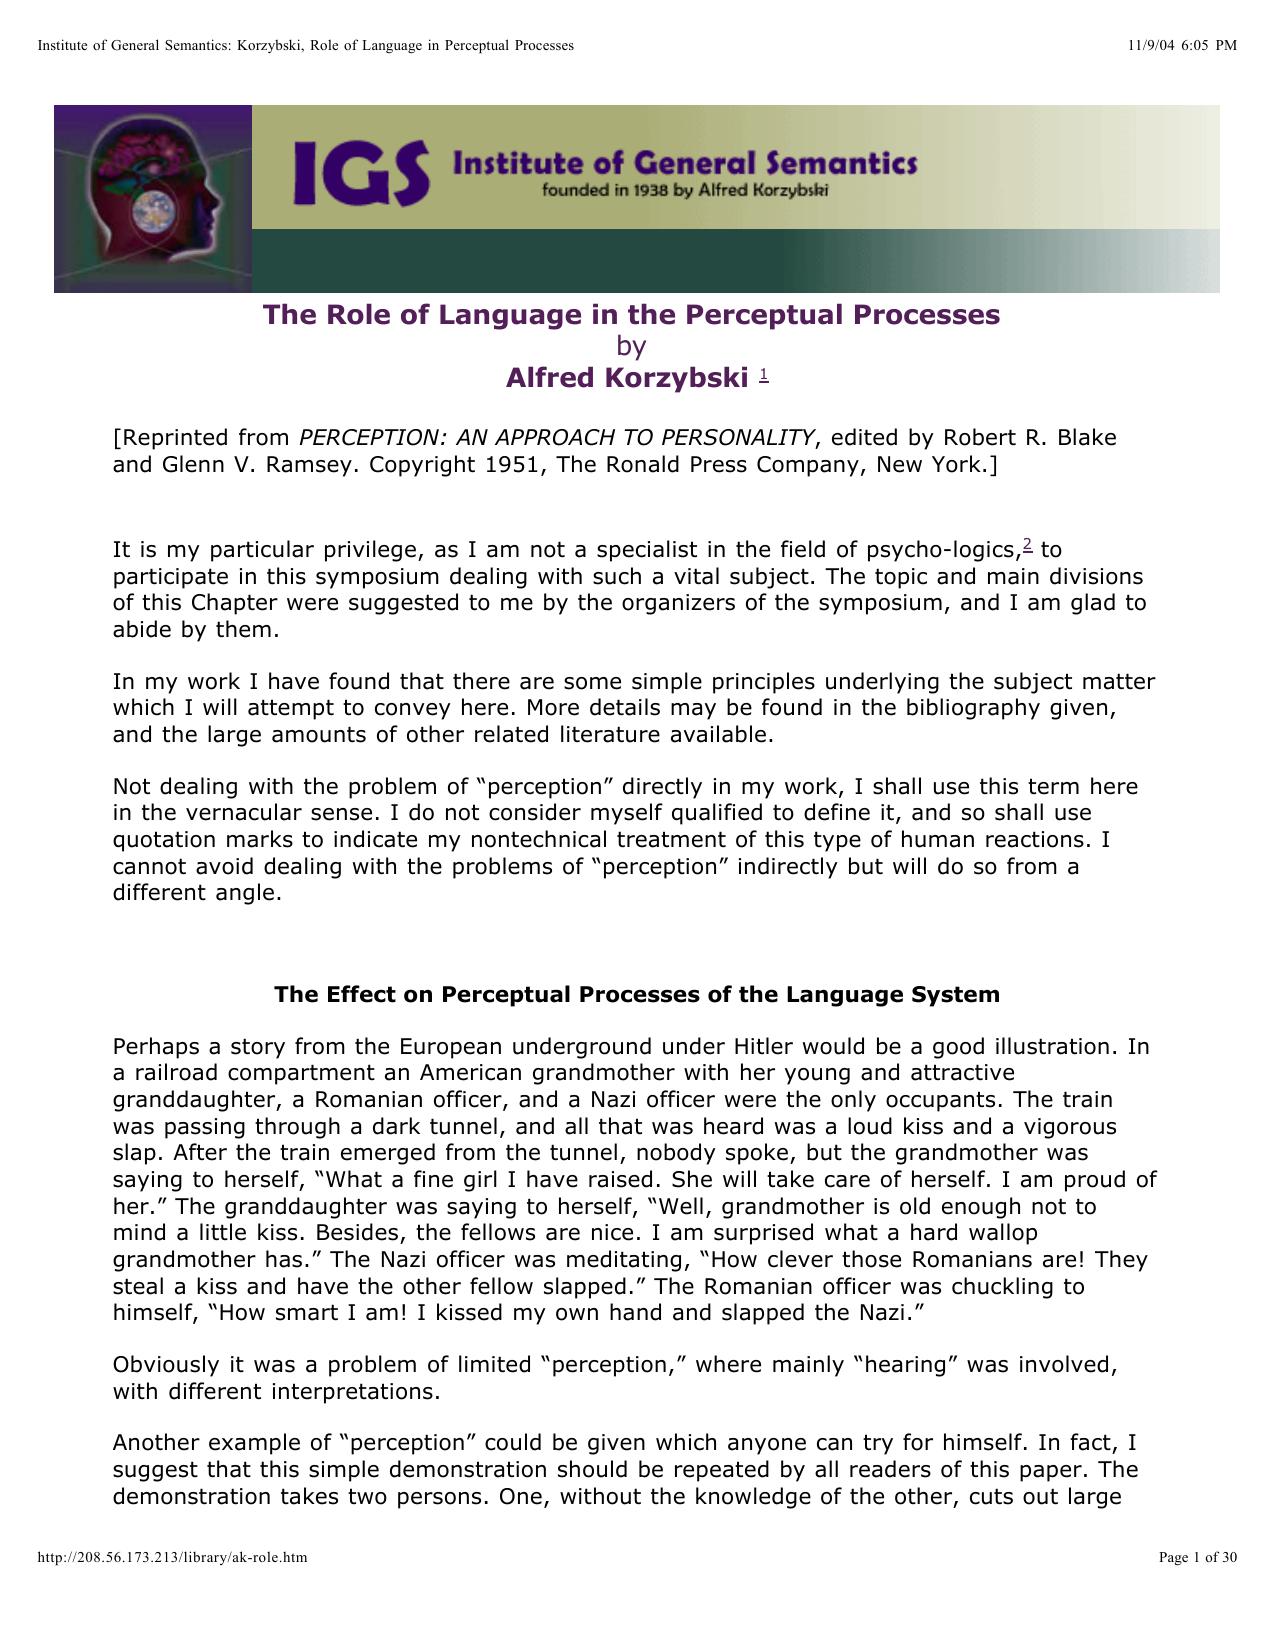 The Role of Language in the Perceptual Processes - Essay